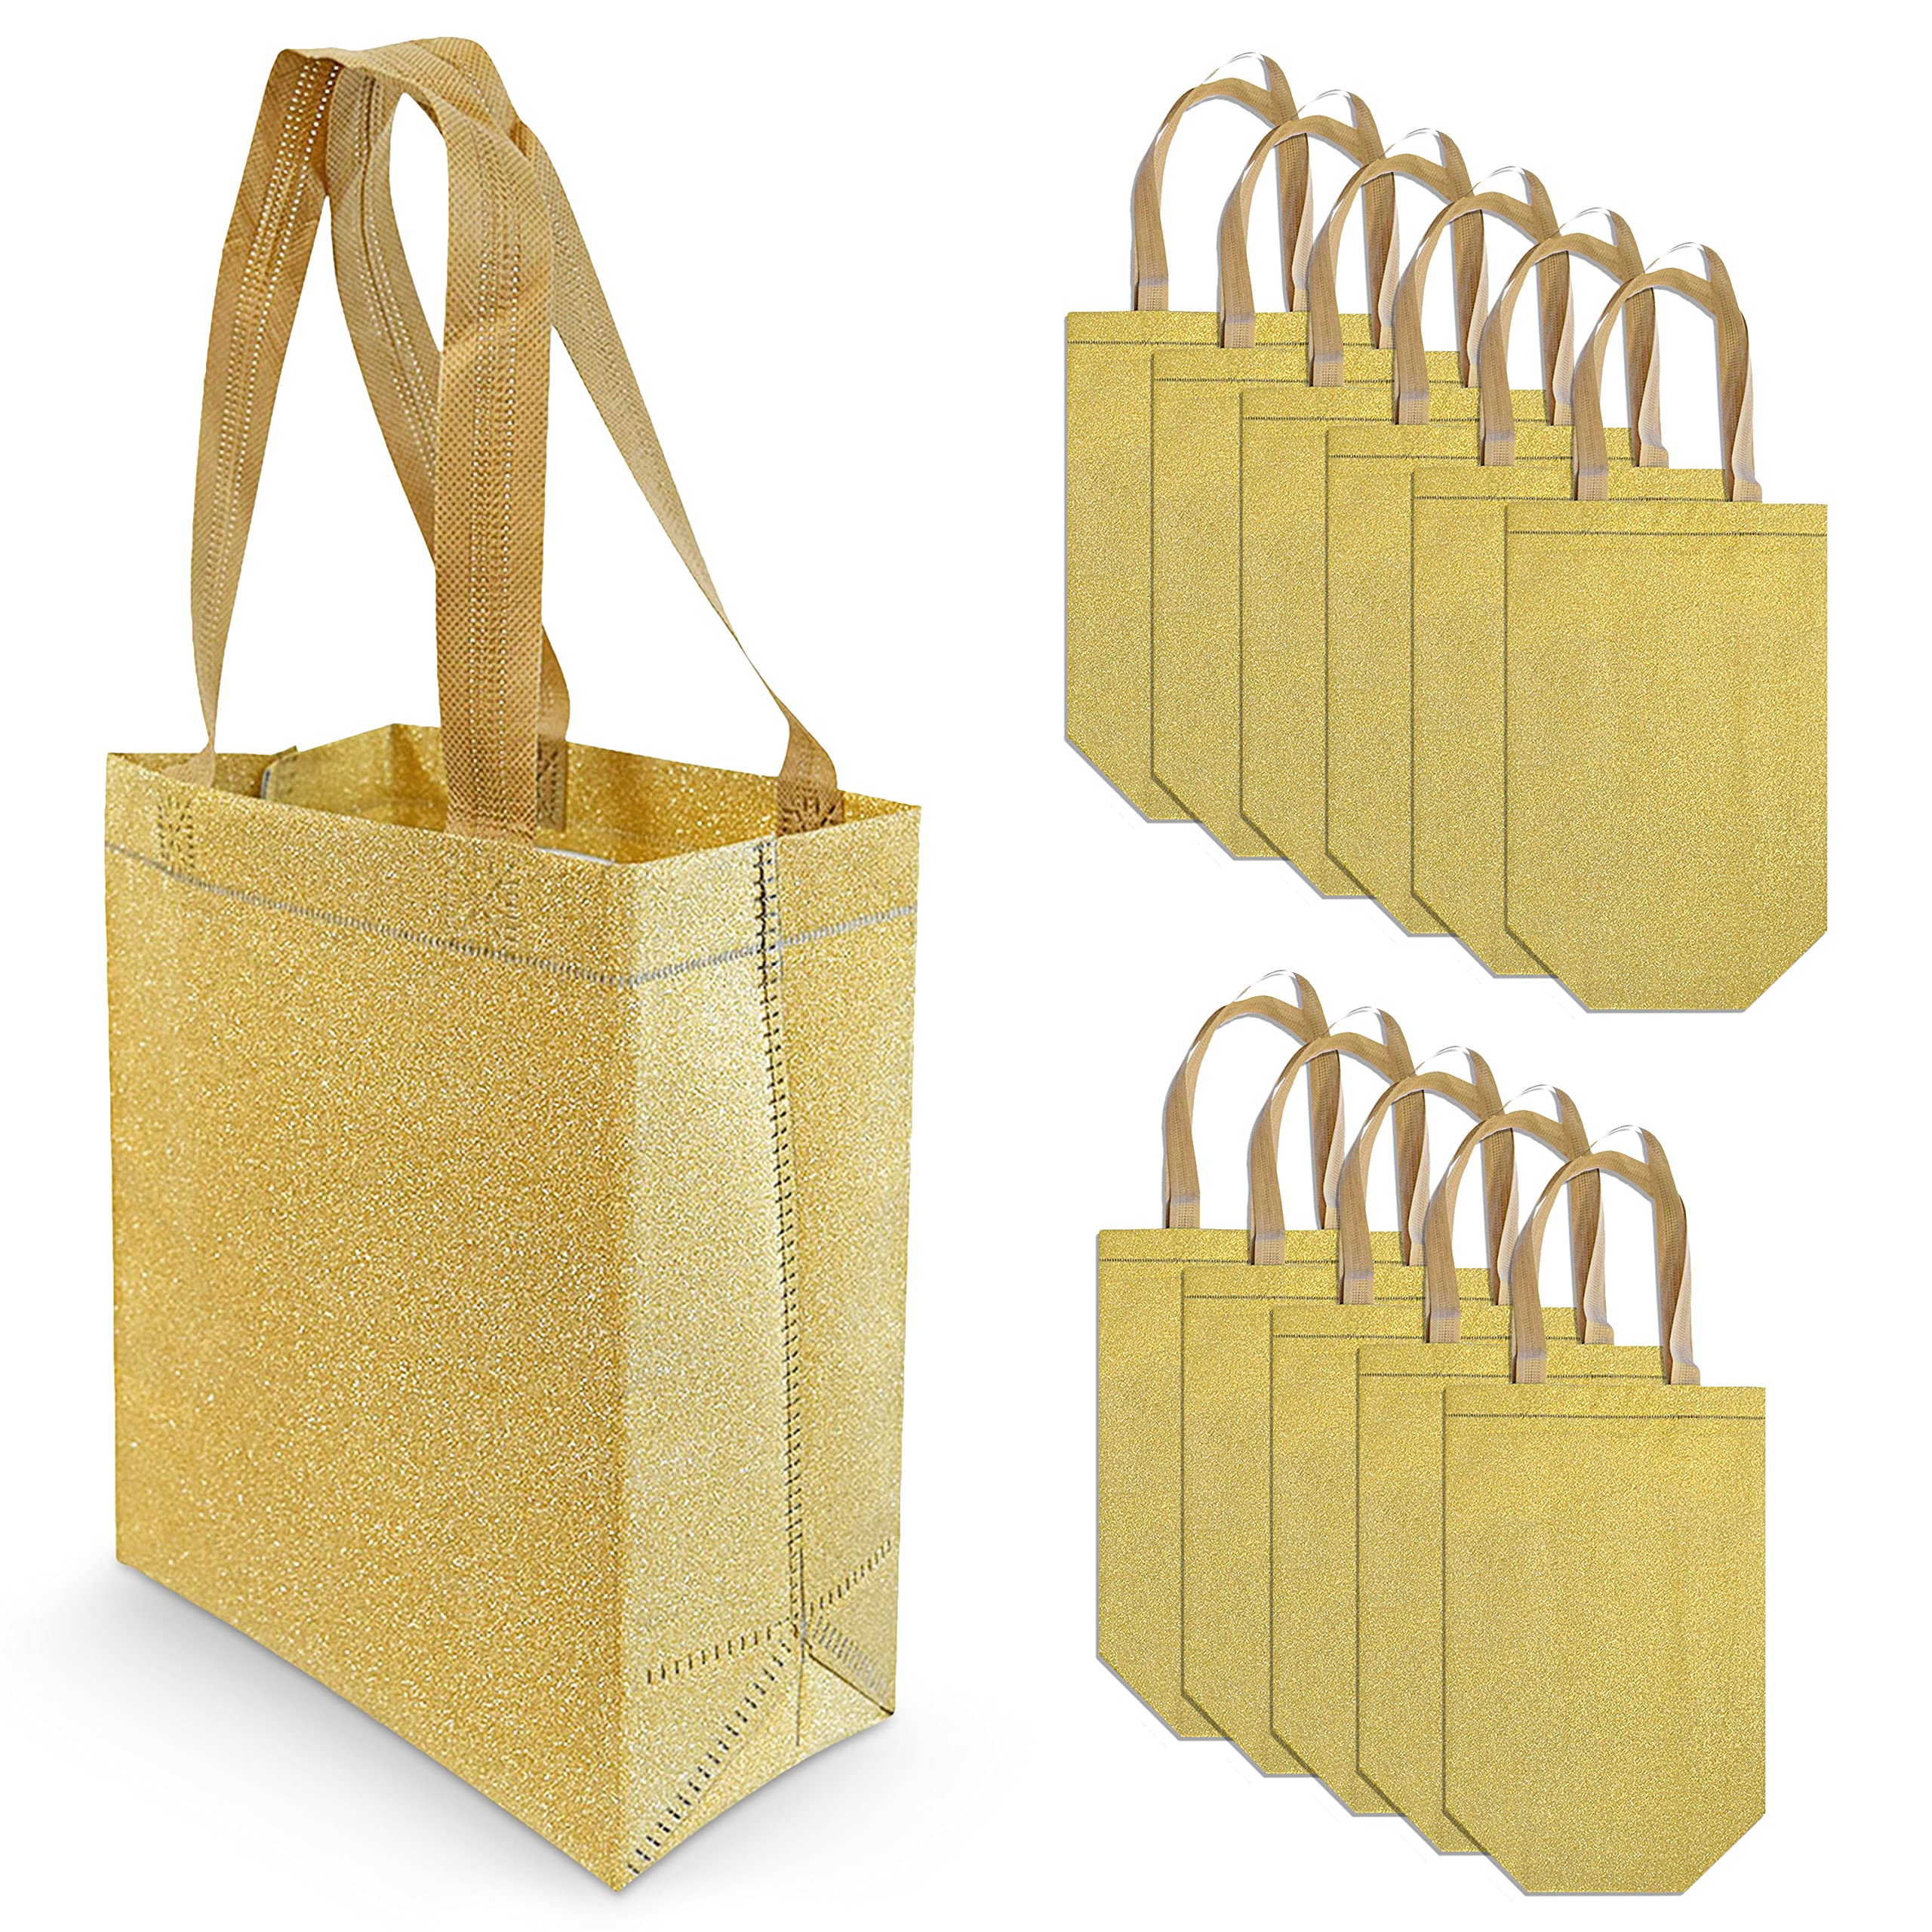 Gold Gift Bags - 12 Pack Small Reusable Gift Bag Tote with Handles, Holographic Glitter Design, Eco Friendly for Christmas & Holiday Gifts, Birthday, Wedding & Party Favors, in Bulk - 8x4x10  - Acceptable